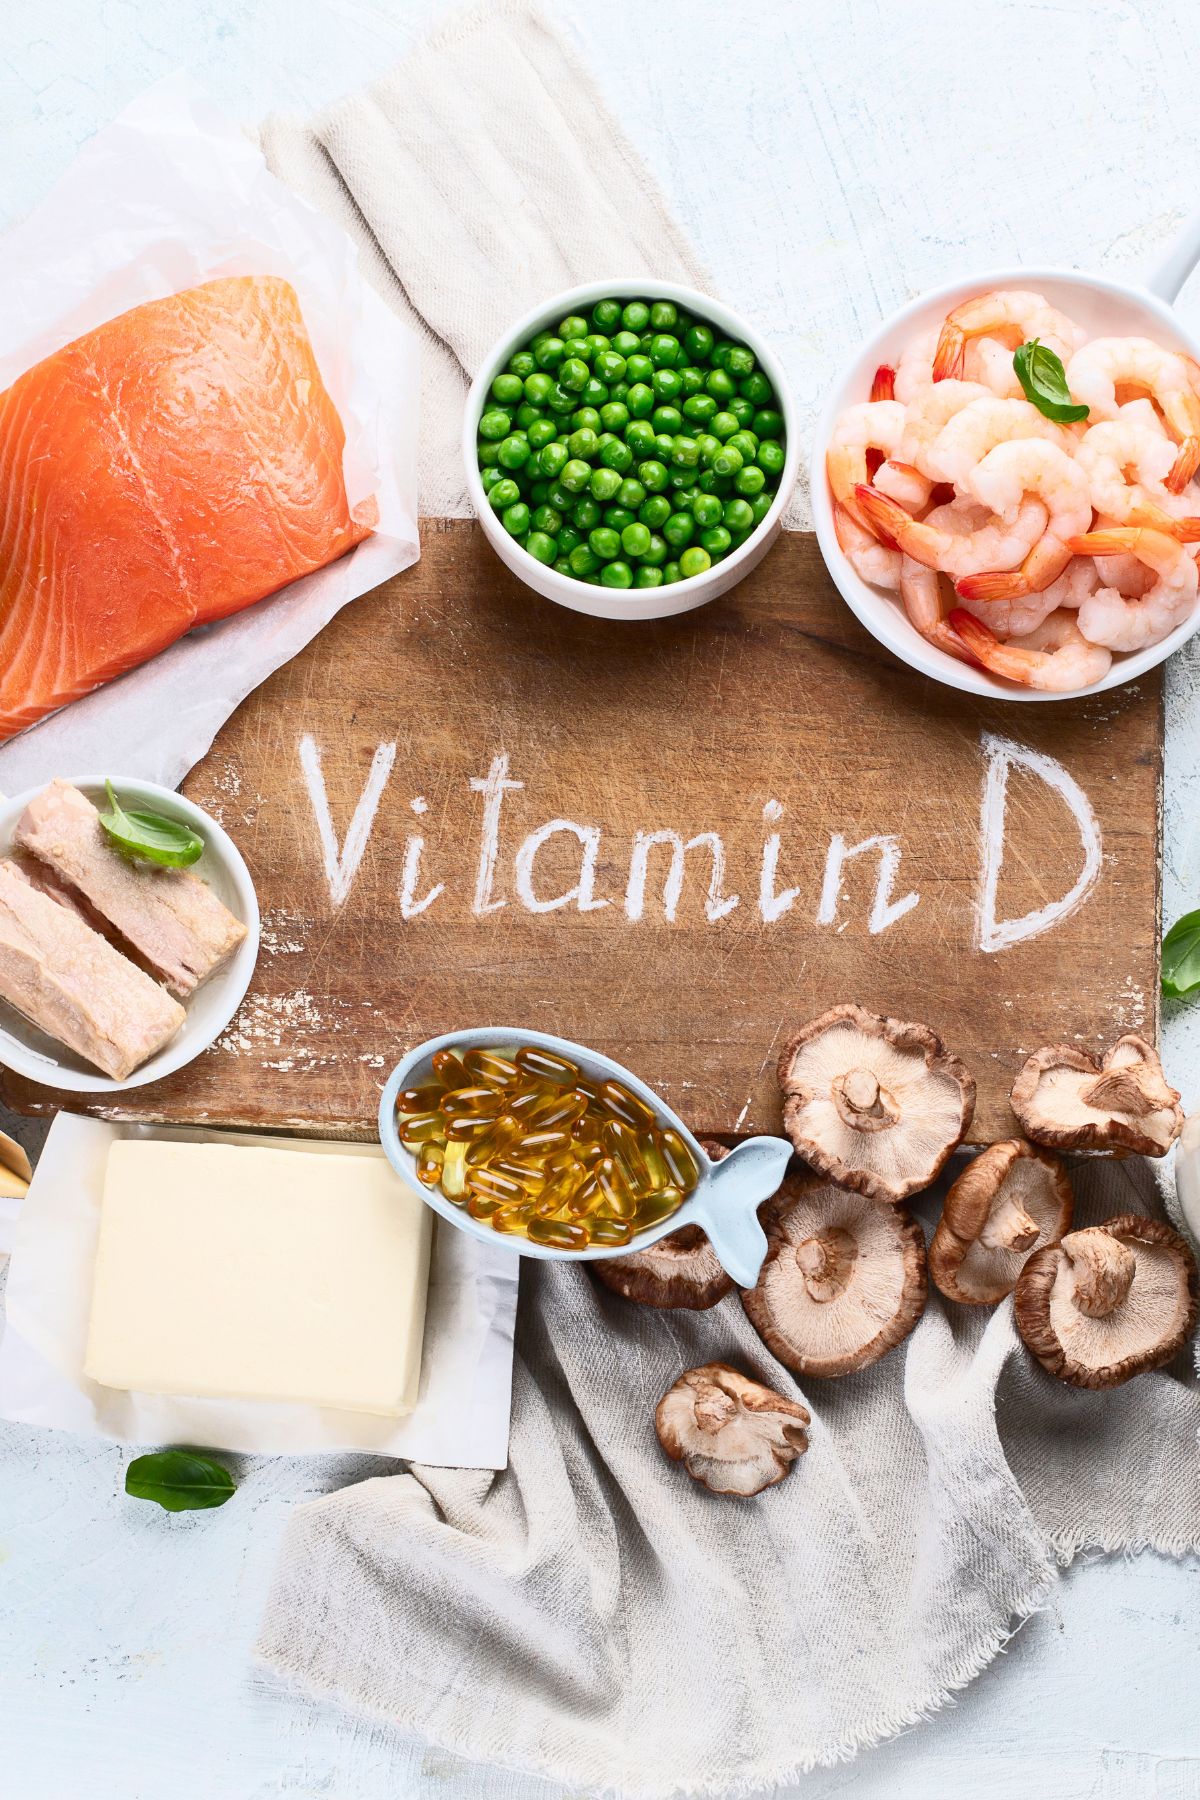 foods that are a good source of vitamin D surrounding a board saying "vitamin D."